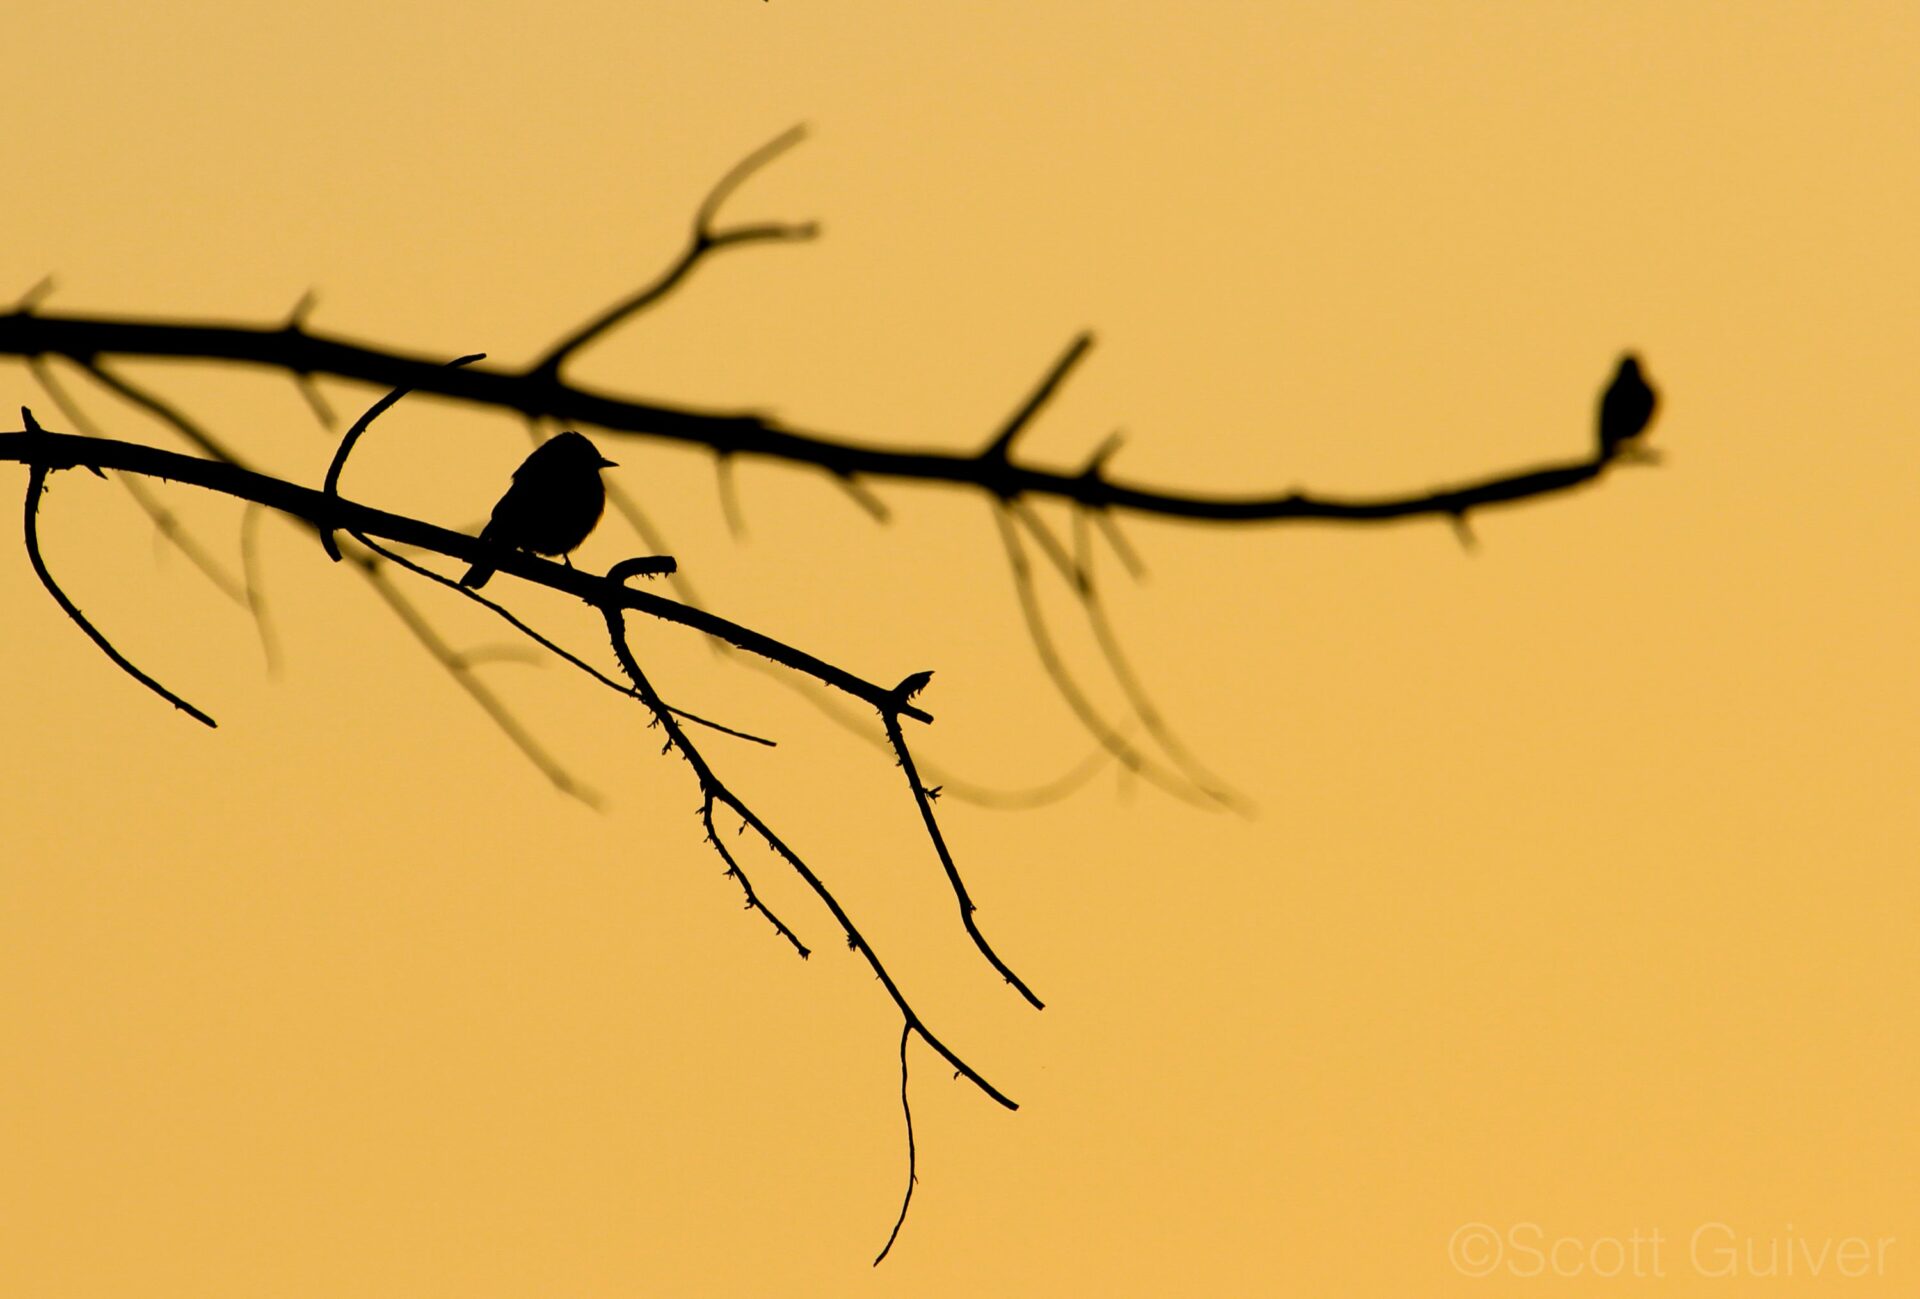 A pair of Spotted Flycatchers (Muscicapa striata) waiting on their perches at sunset for passing insects. Credit: Scott Guiver 